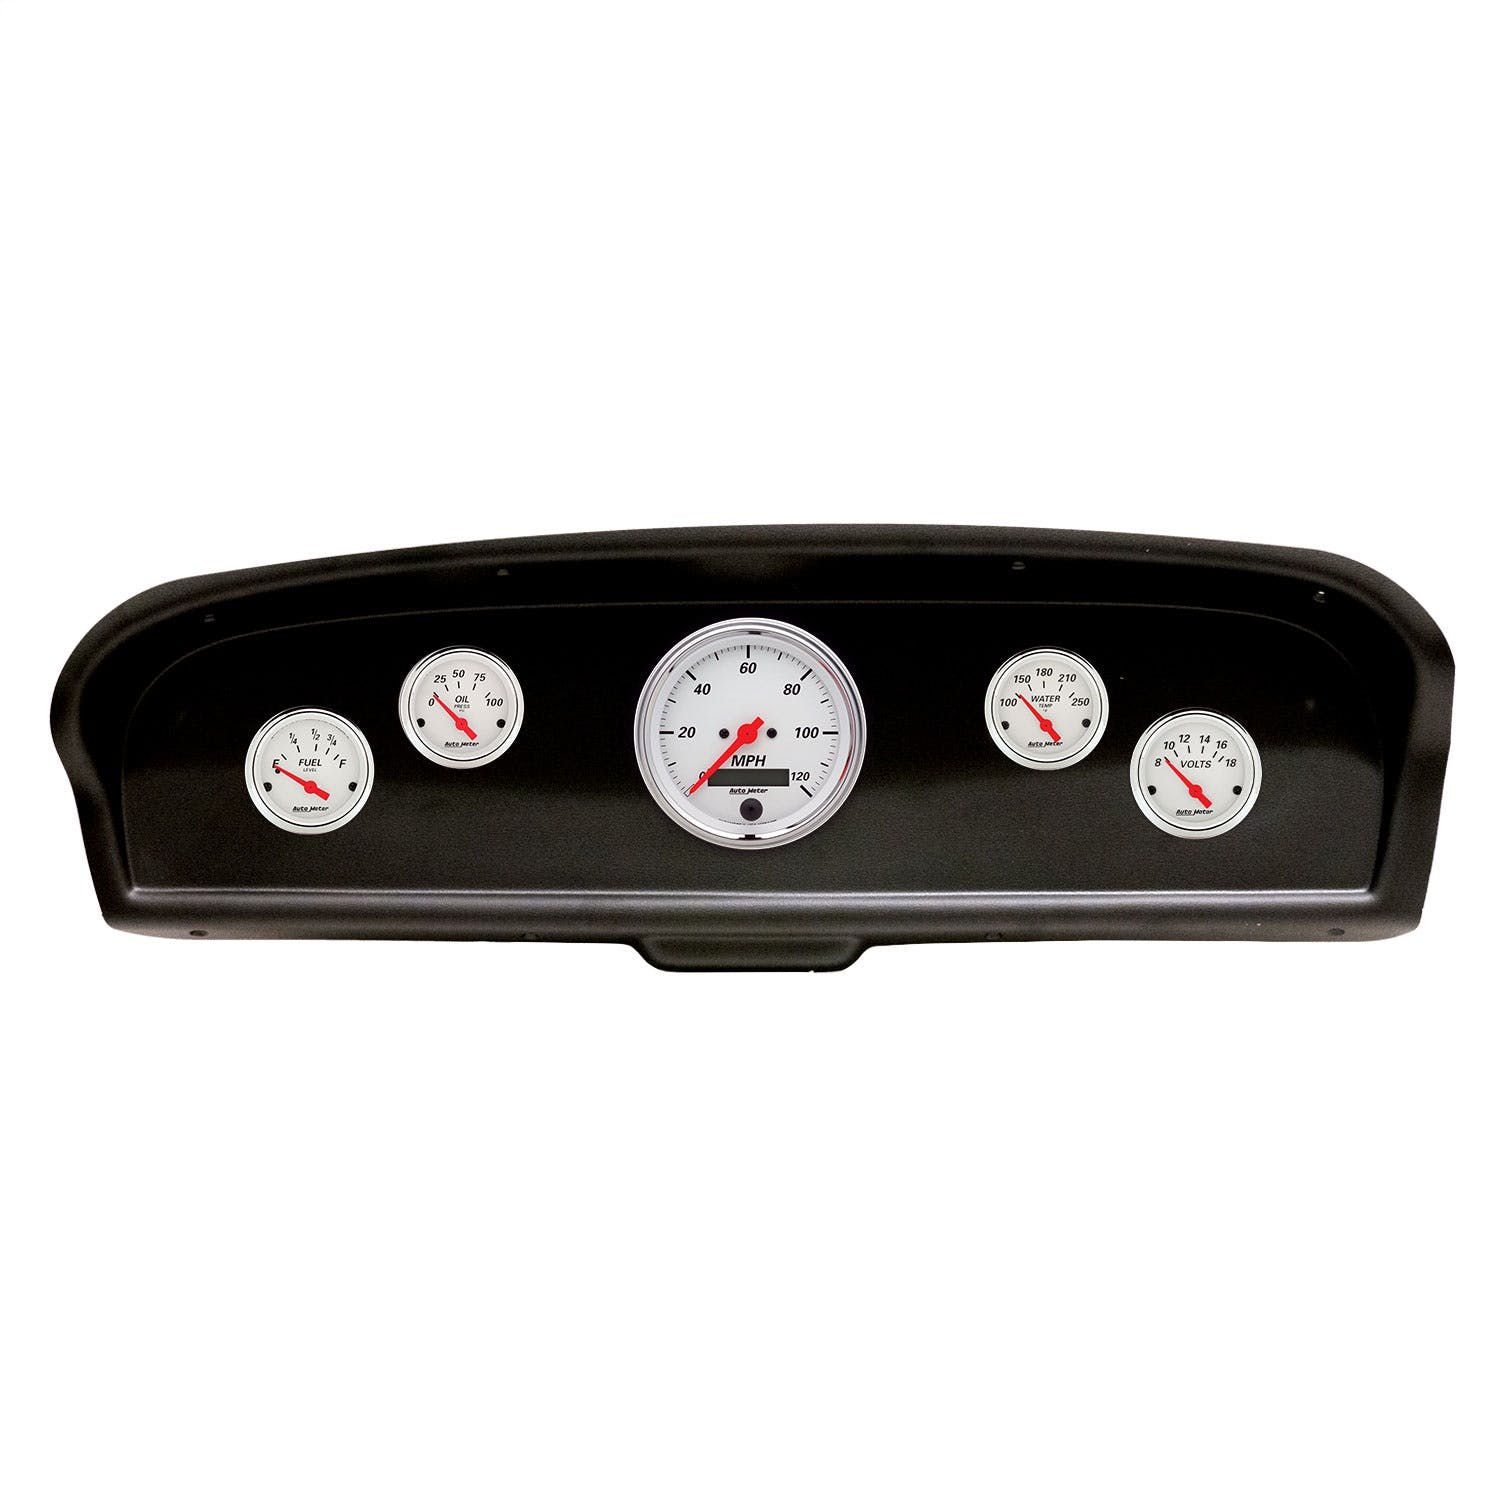 AutoMeter Products 2105-03 5 Gauge Direct-Fit Dash Kit, Ford Truck 61-66, Arctic White